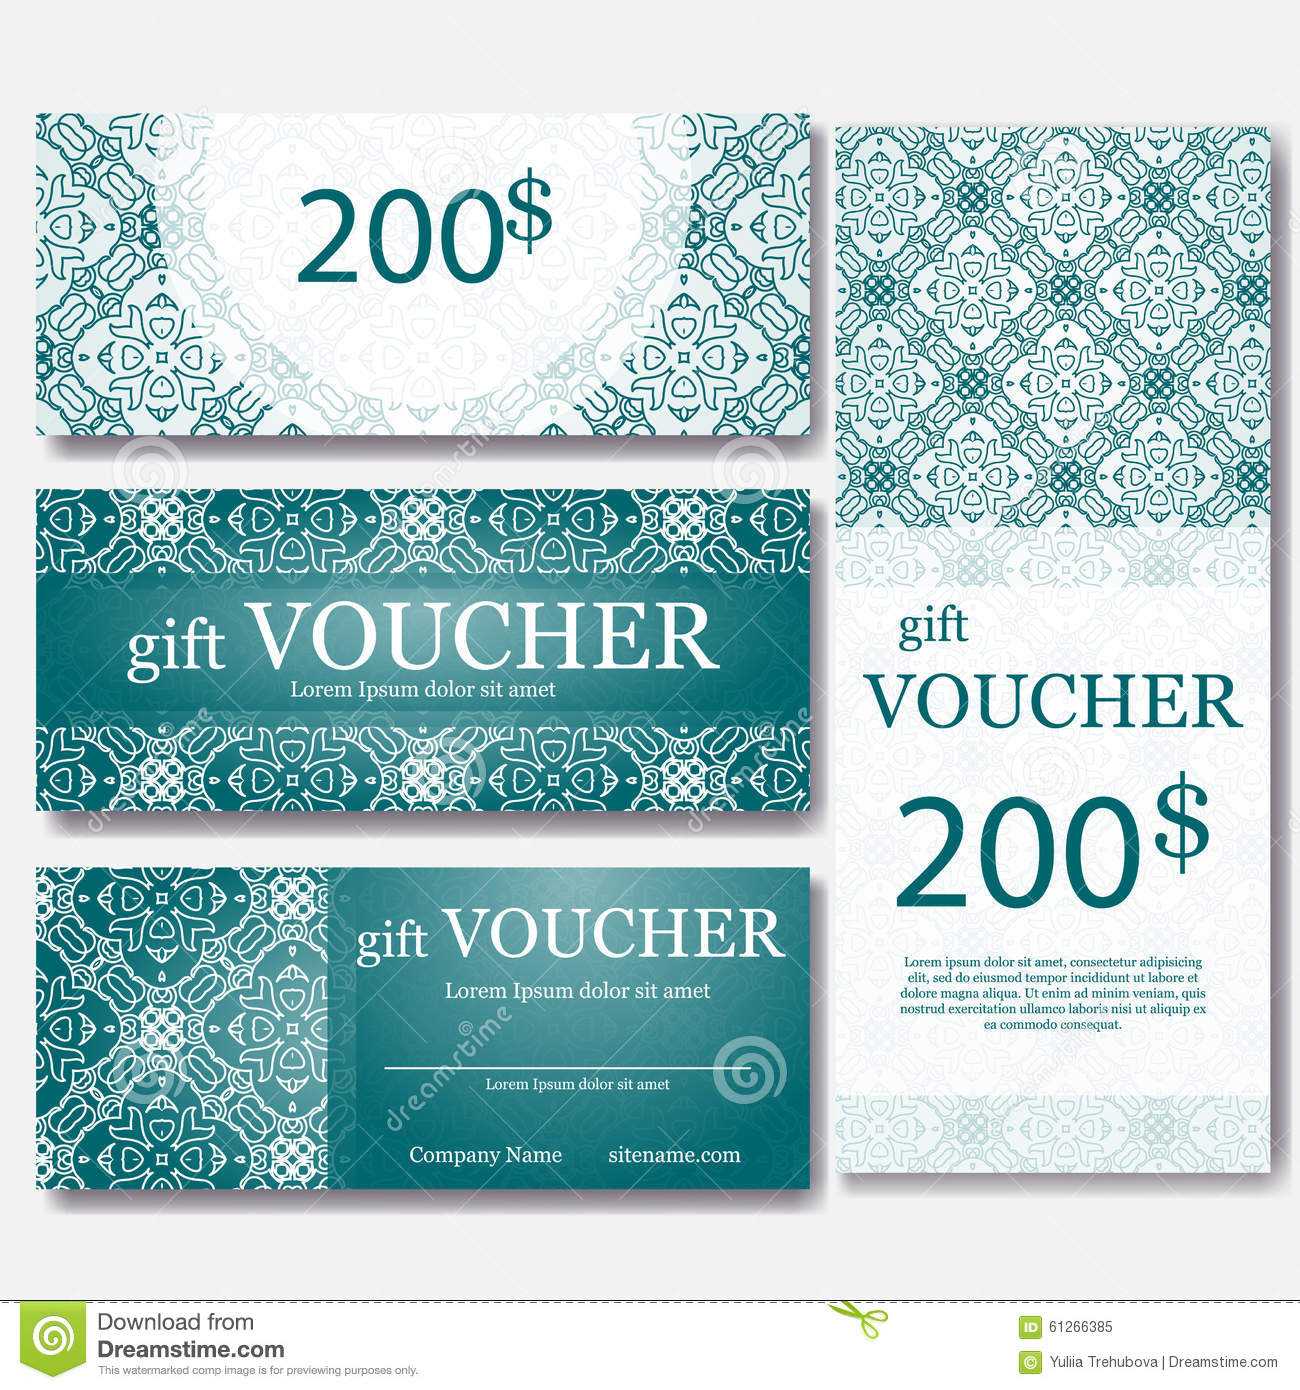 Gift Voucher Template With Mandala. Design Certificate For With Magazine Subscription Gift Certificate Template